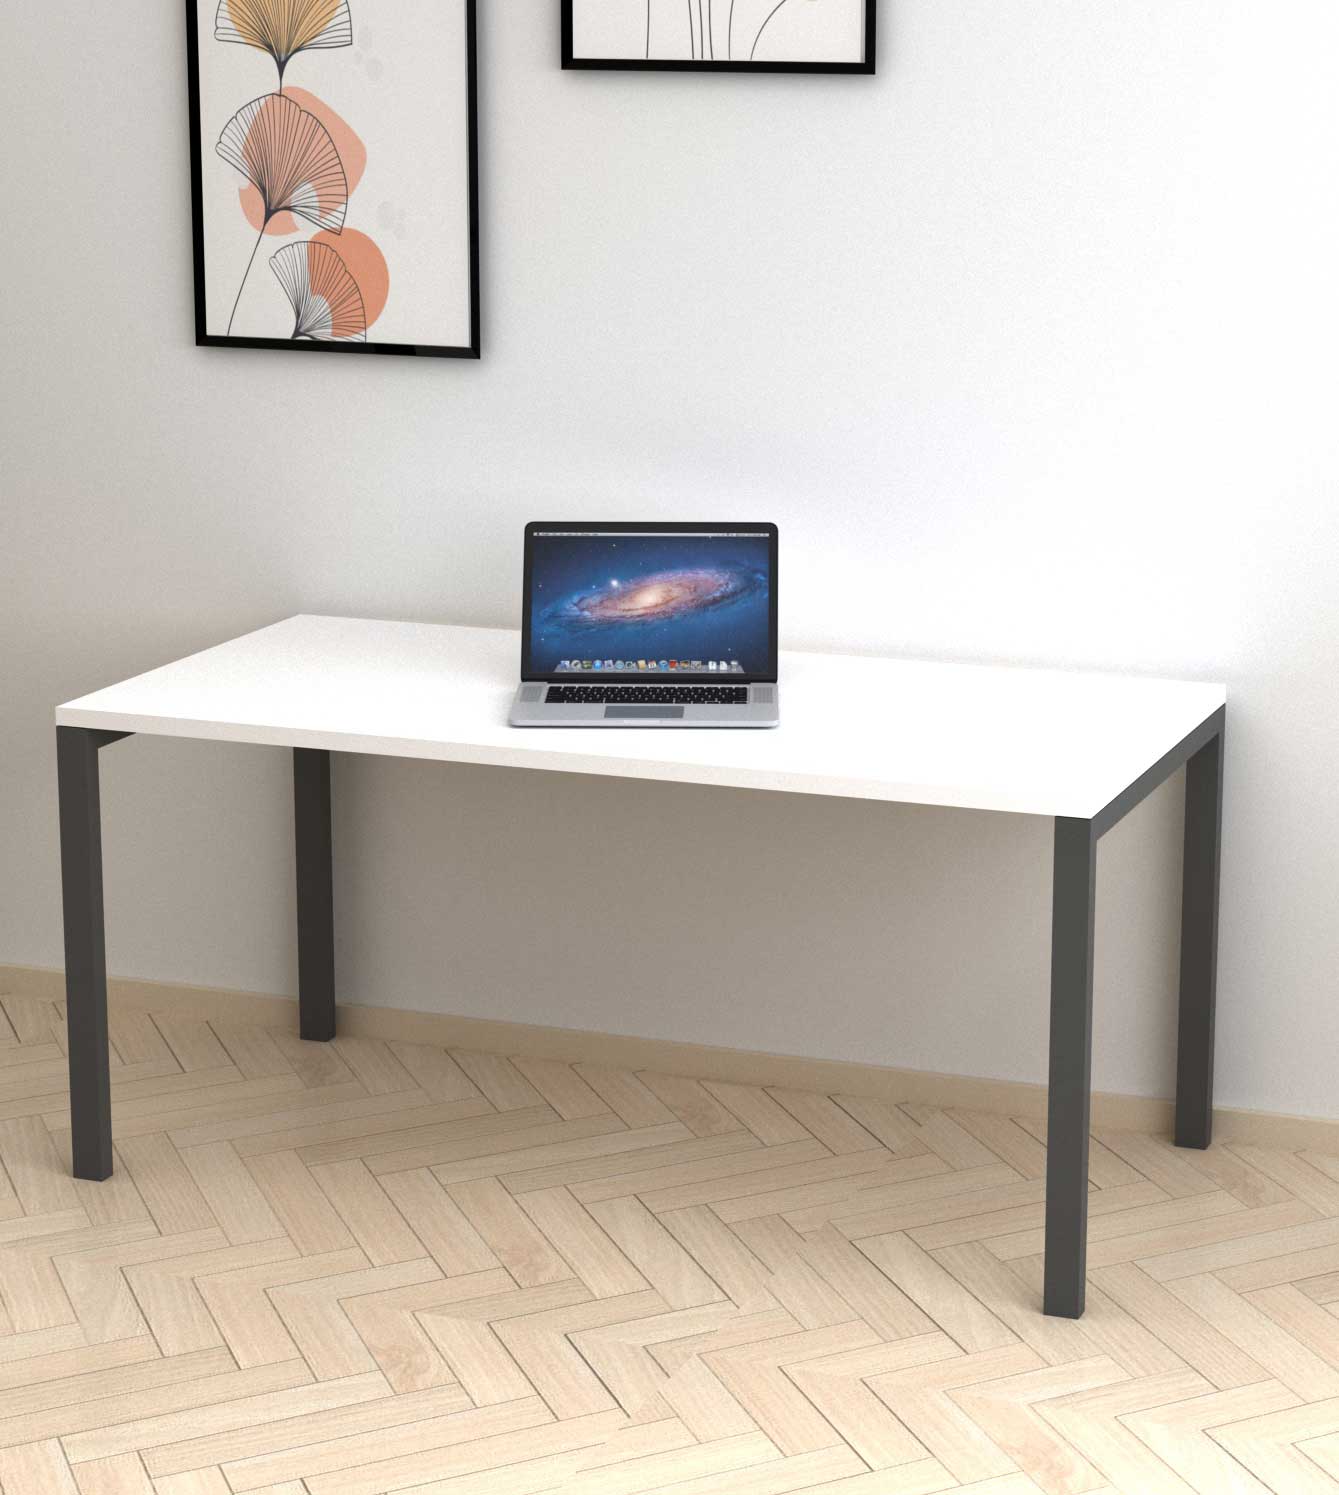 A Modern Desk manufactured using high Quality  metal legs and sturdy wooden tabletop with HPL layer which makes it strong and weather-resistant.